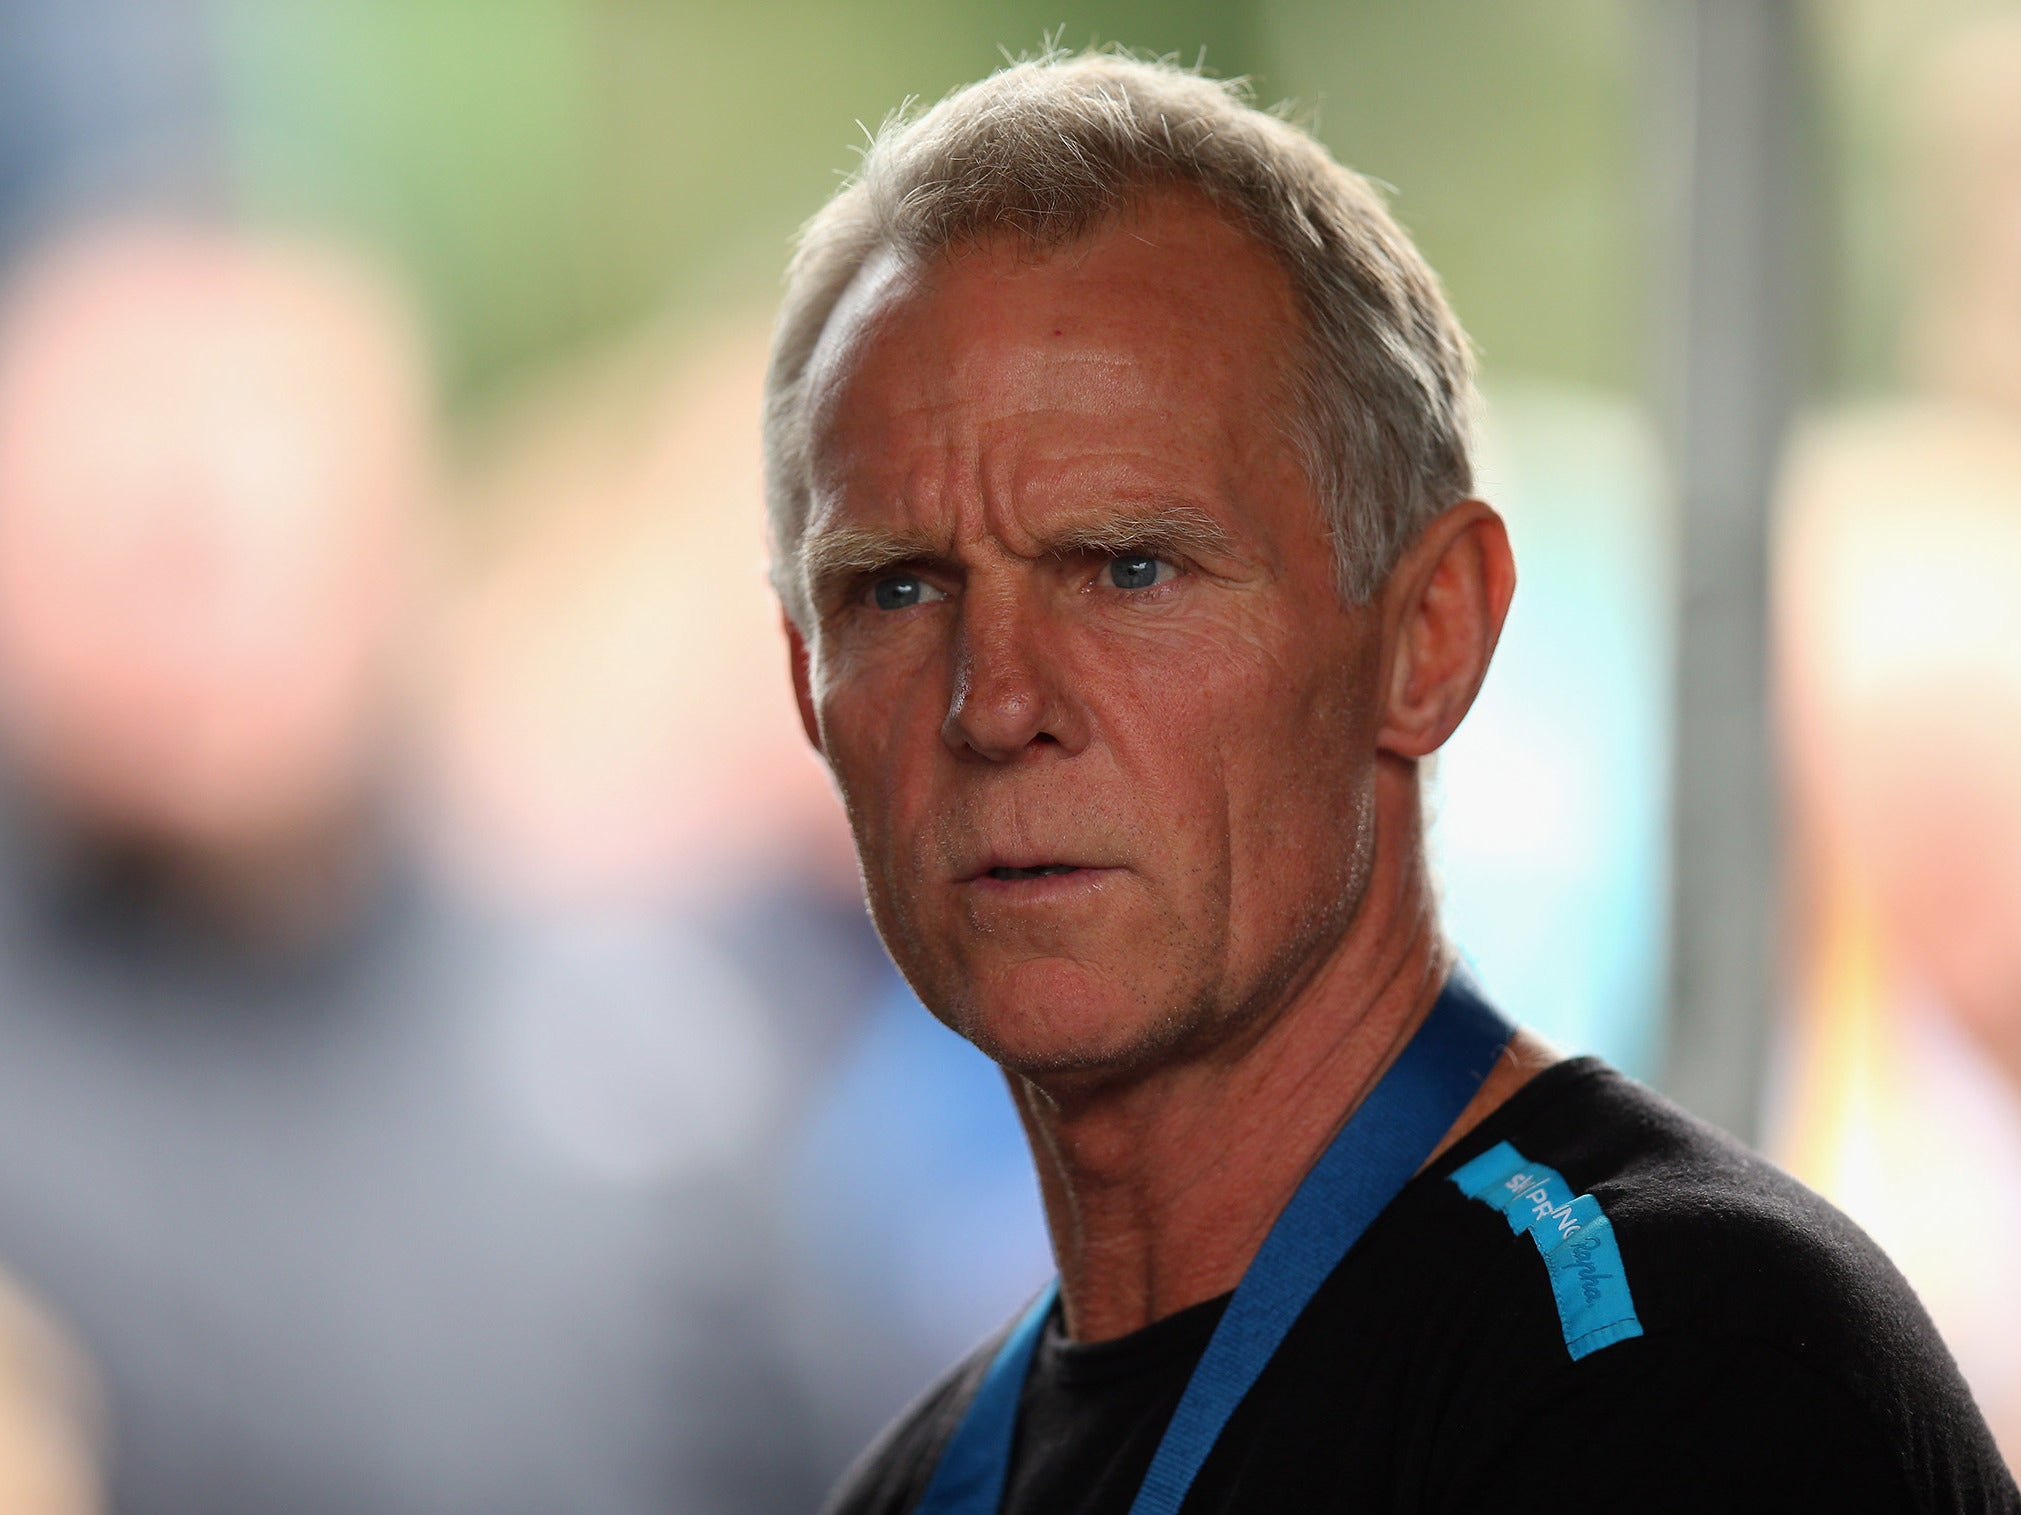 Richard Freeman's defence team to question credibility of former British Cycling and Team Sky head coach Shane Sutton